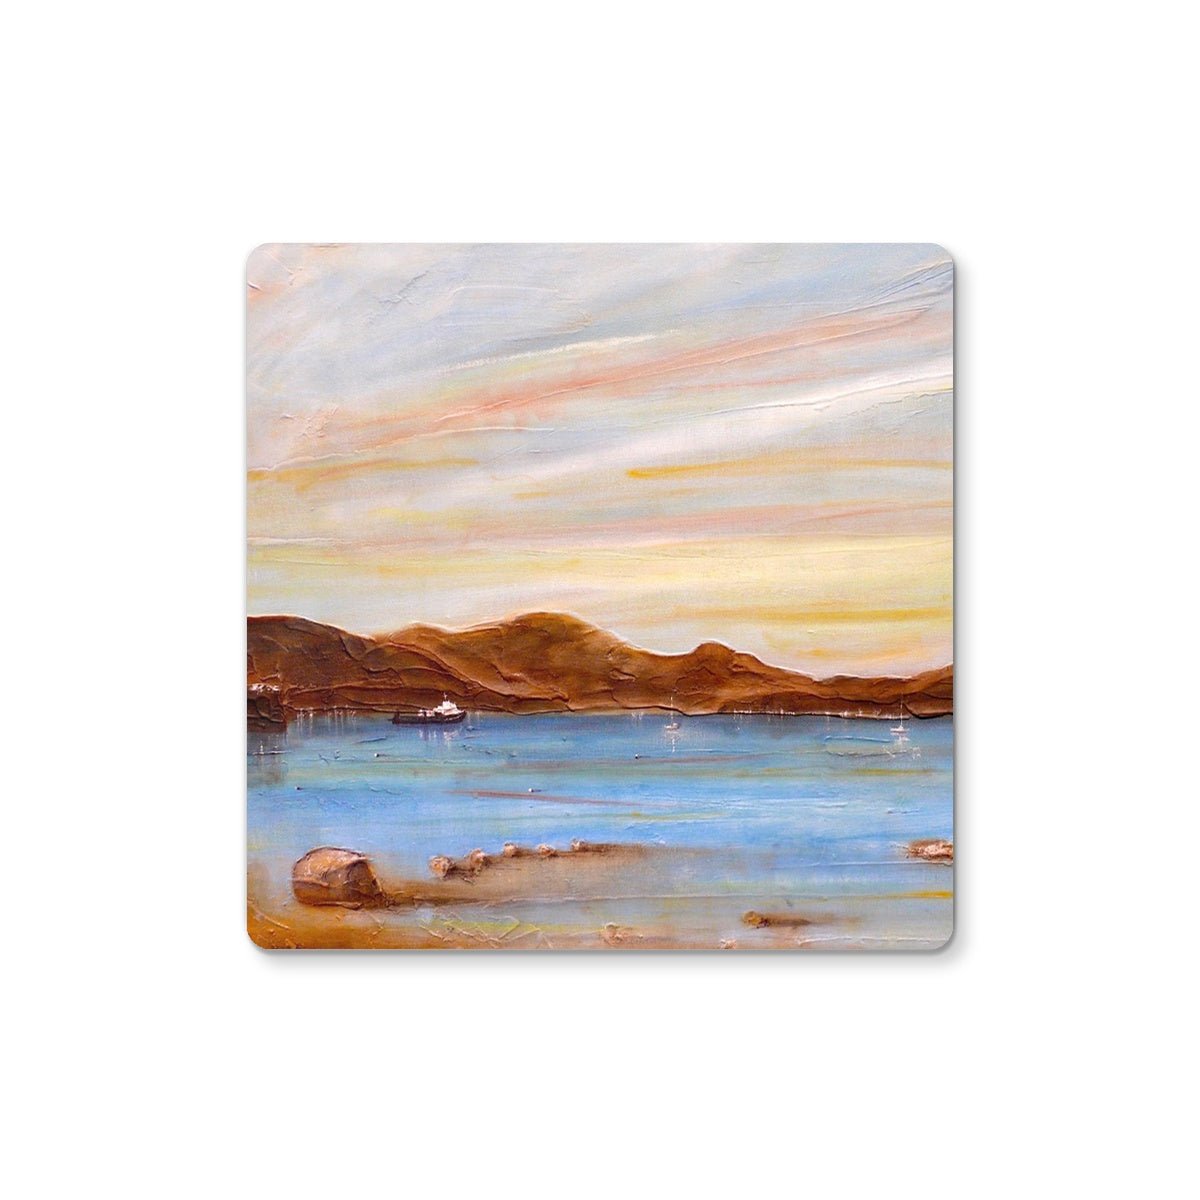 The Last Ferry To Dunoon Art Gifts Coaster-Coasters-River Clyde Art Gallery-4 Coasters-Paintings, Prints, Homeware, Art Gifts From Scotland By Scottish Artist Kevin Hunter